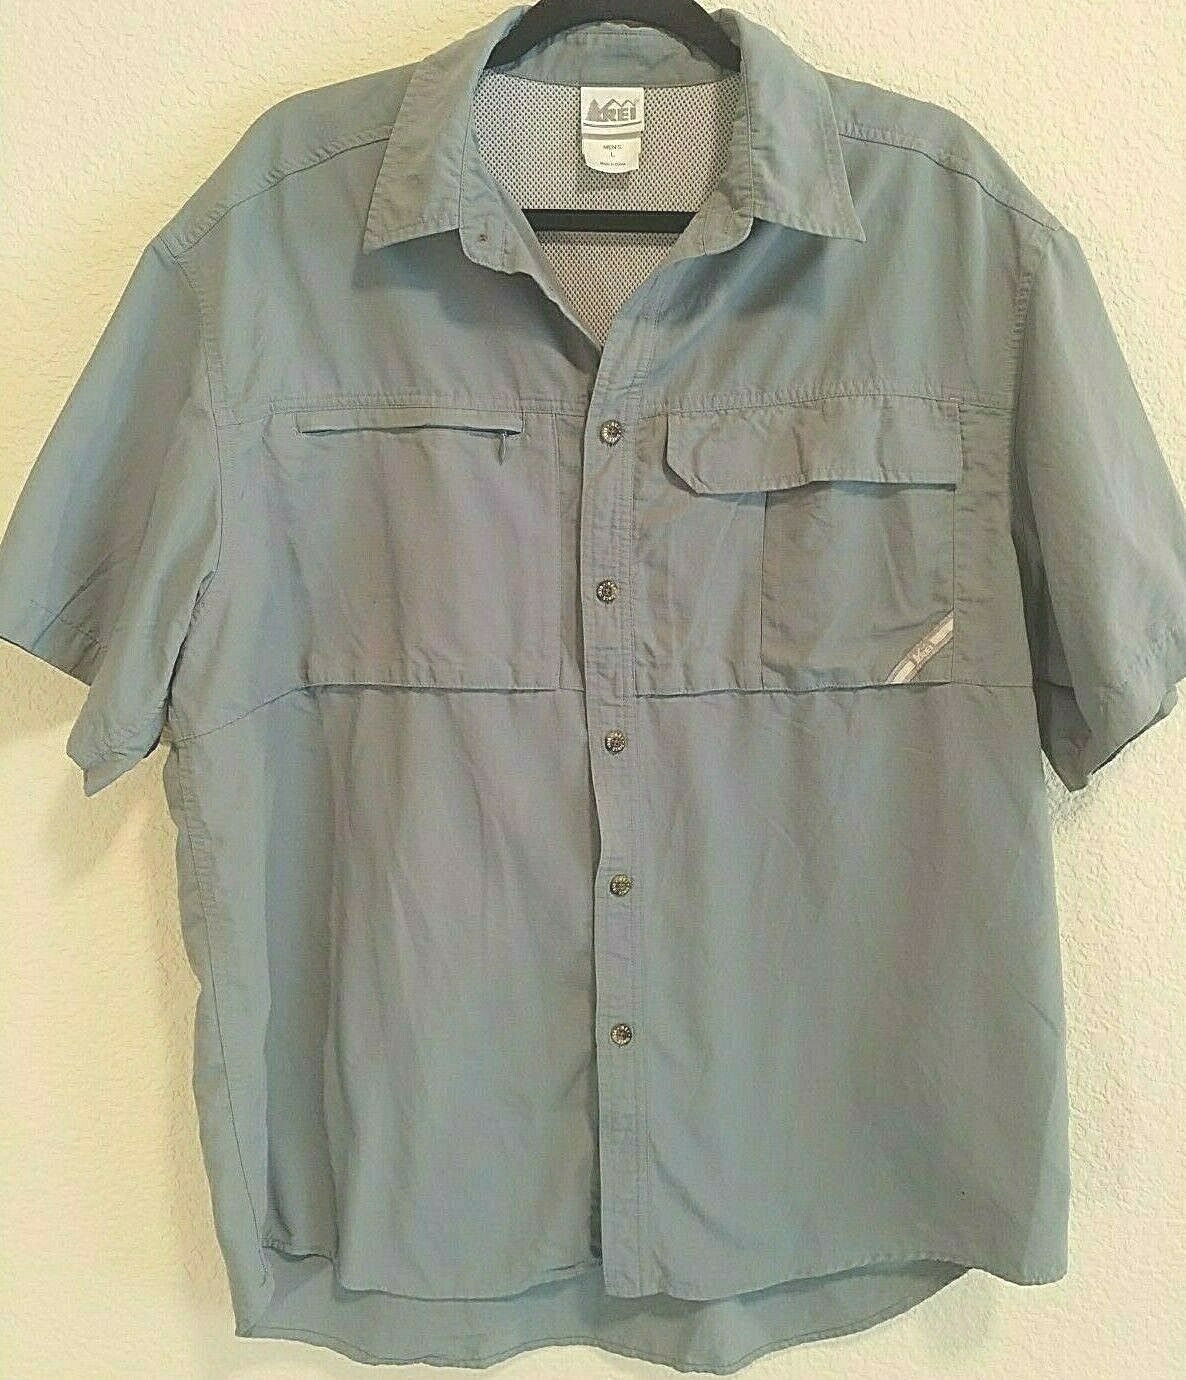 Primary image for Men's REI Outdoors Size Large Shirt Grey Short Sleeves Summer Fishing L